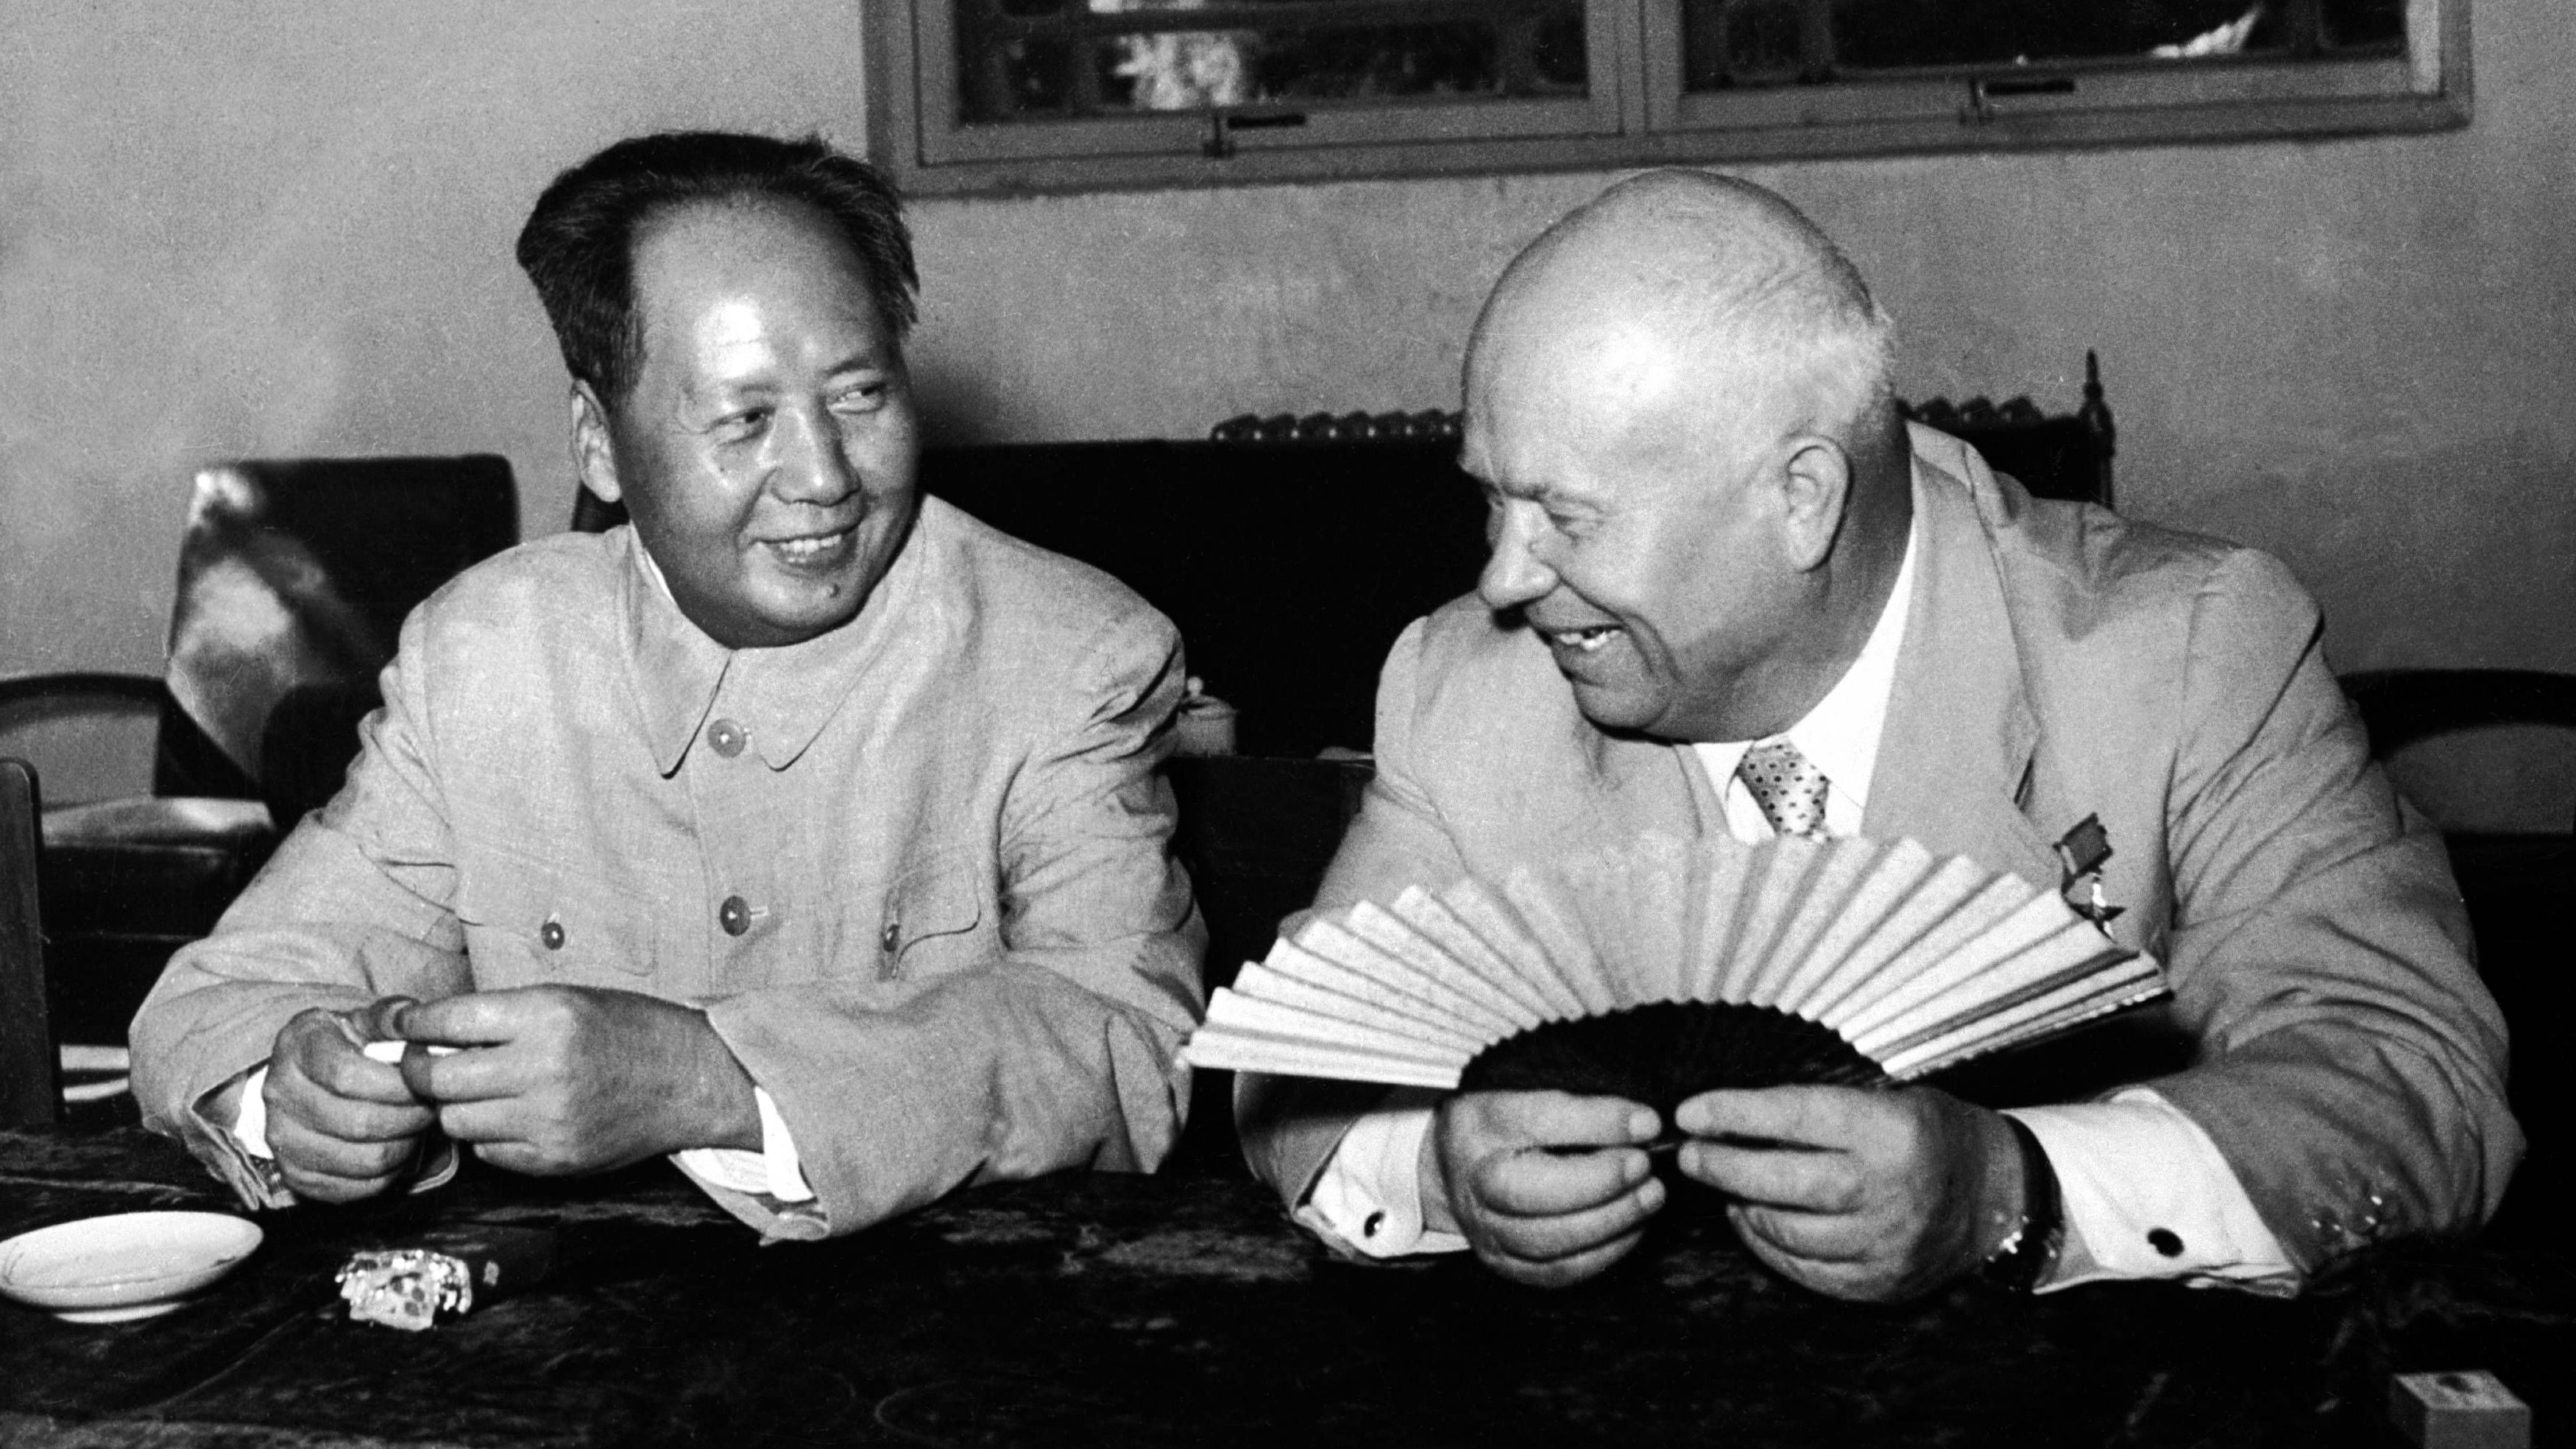 Mao meets Soviet leader Nikita Khrushchev in Beijing in August 1958. Despite China and the Soviet Union both being communist nations, their leaders didn't see eye to eye on the future of communism — in particular, Mao disagreed with Khrushchev's policies of peaceful coexistence with the West. Relations would soon sour between the two nations, with public denunciations in 1960.